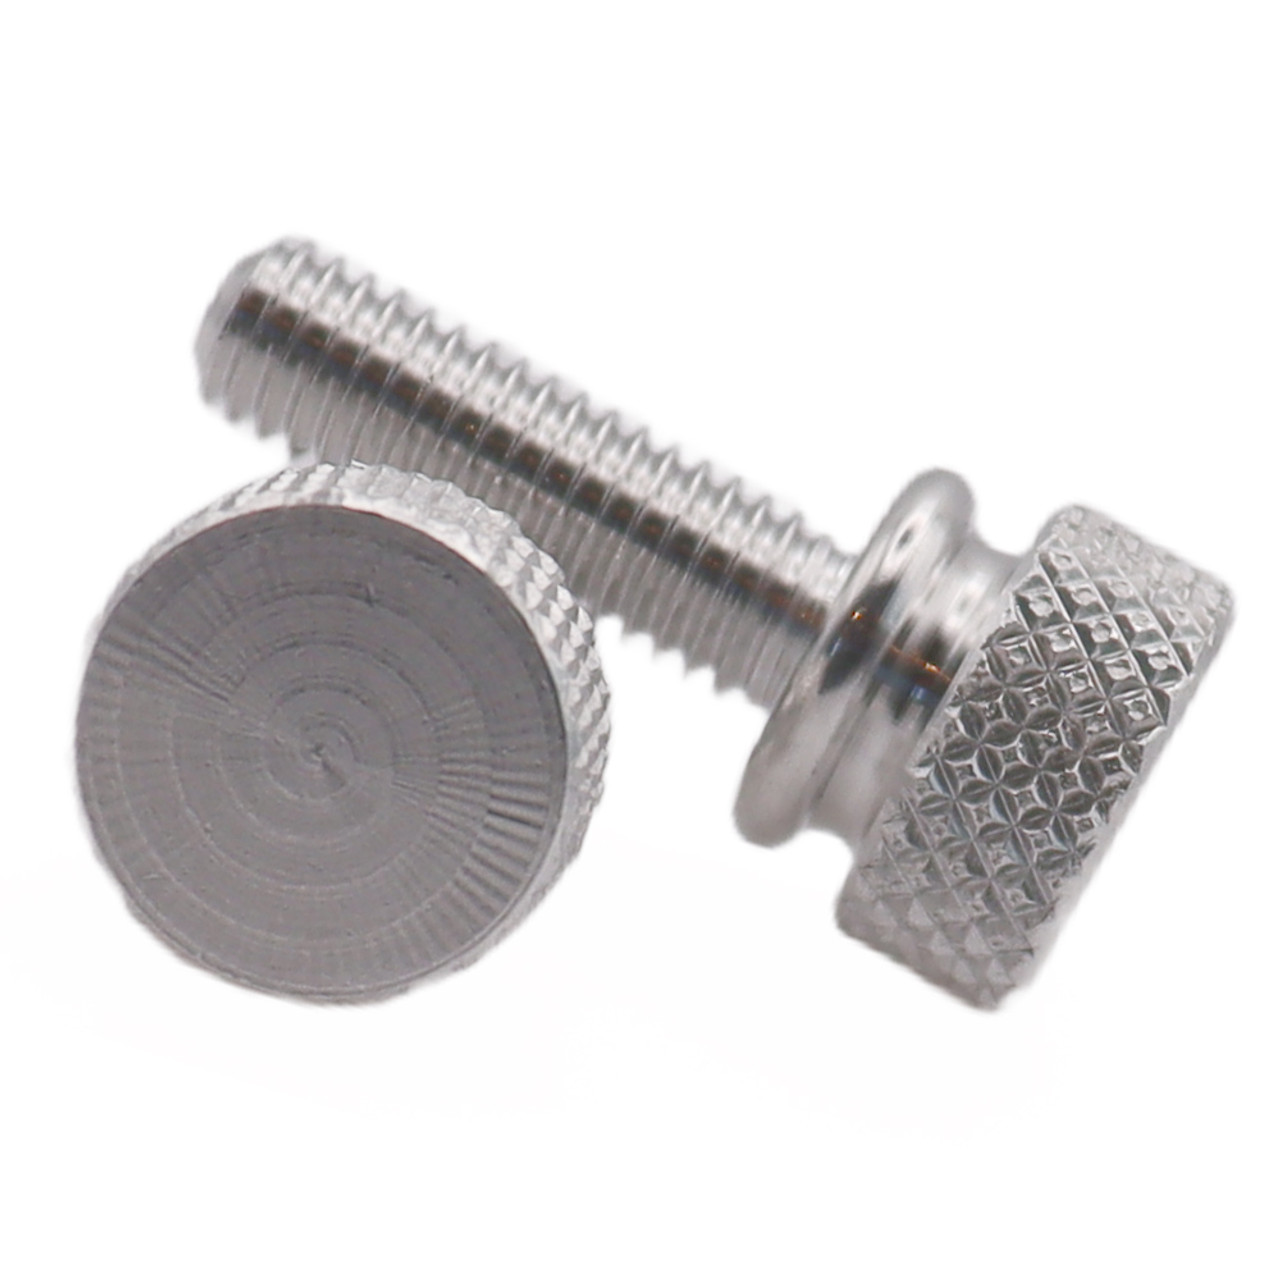 #8-32 x 3/8" (FT) Coarse Thread Knurled Thumb Screw with Washer Face Aluminum